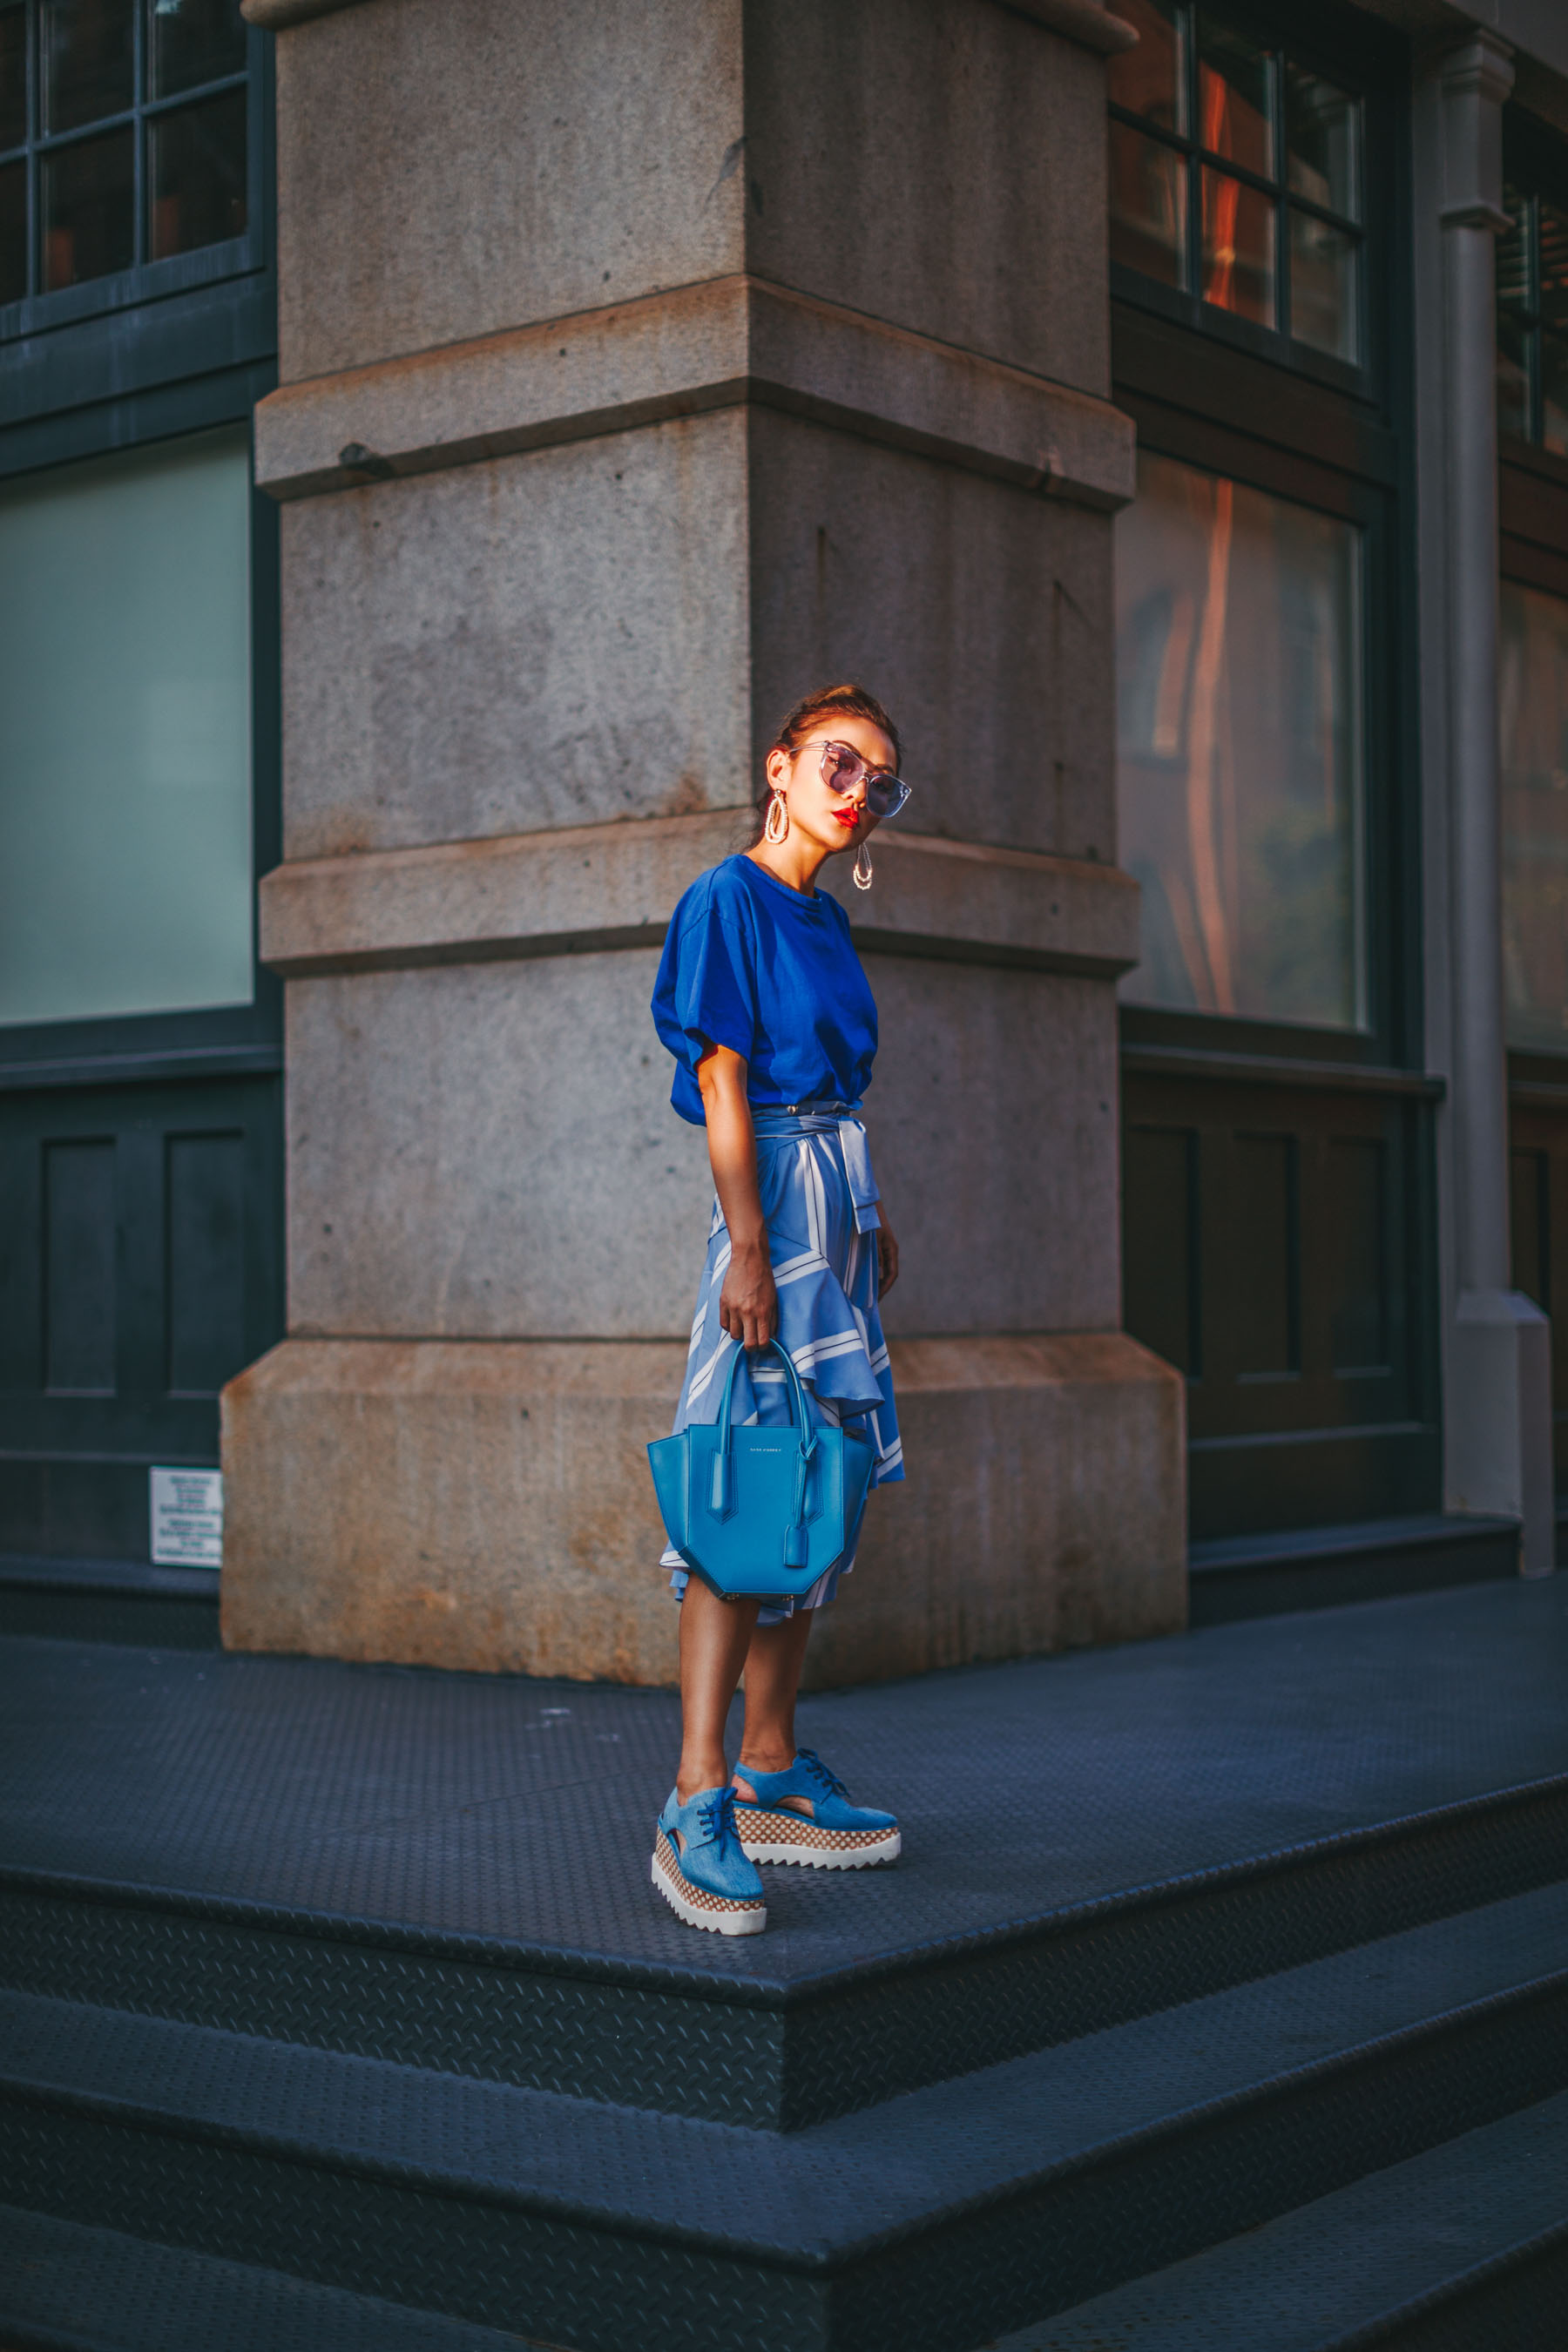 Elevate your everyday outfit with statement color mini bags - Blue Monochromatic Outfit, Edgy Style, Blue Statement Bag // NotJessFashion.com